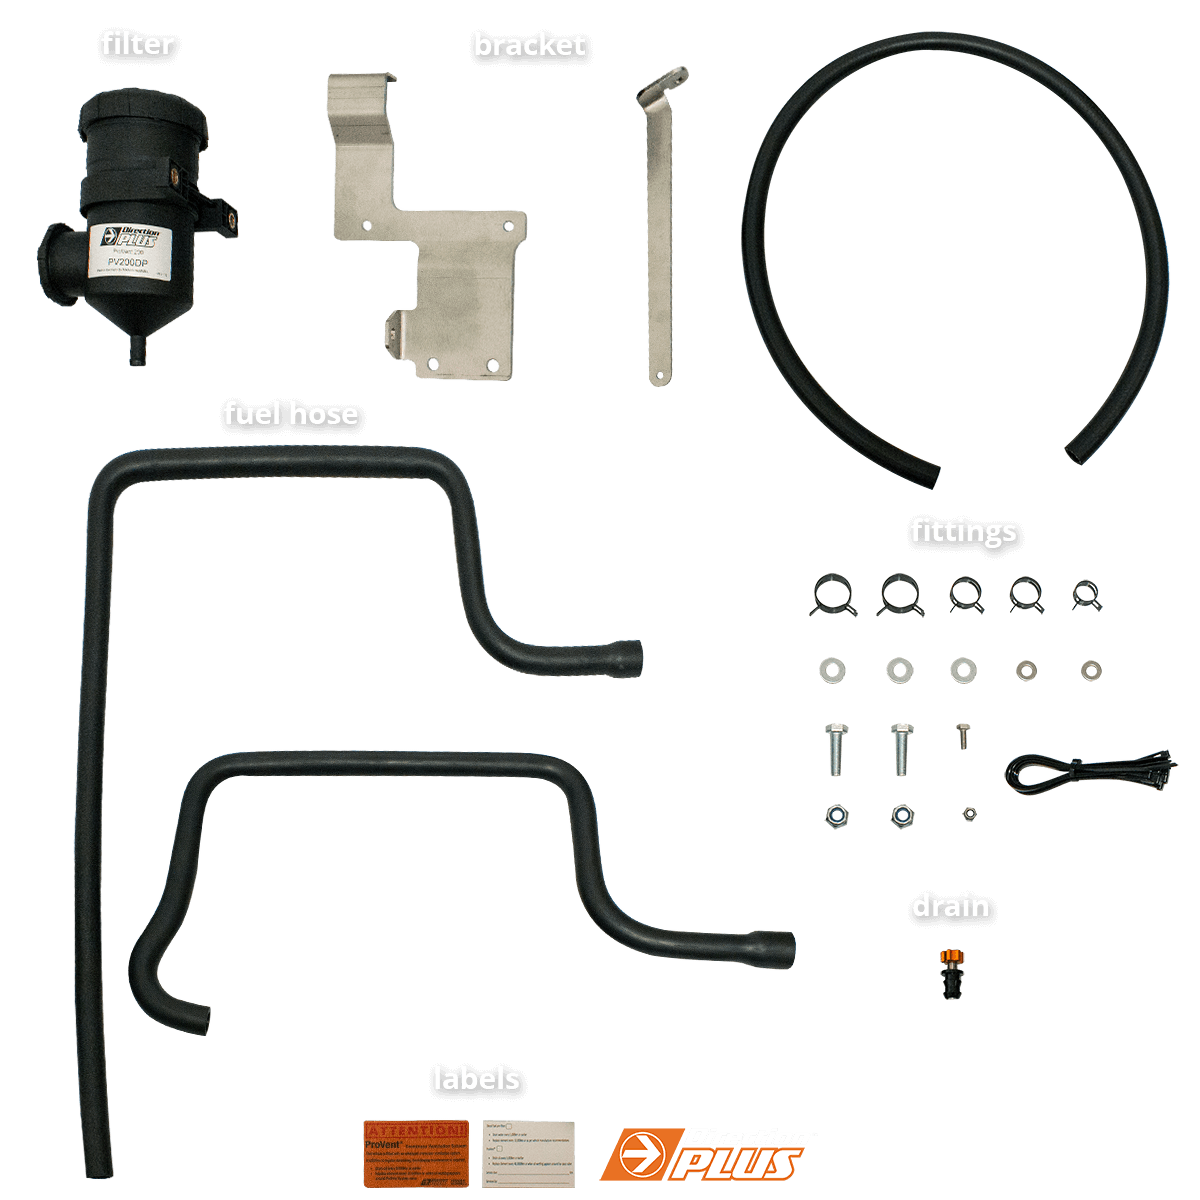 Provent kit All parts